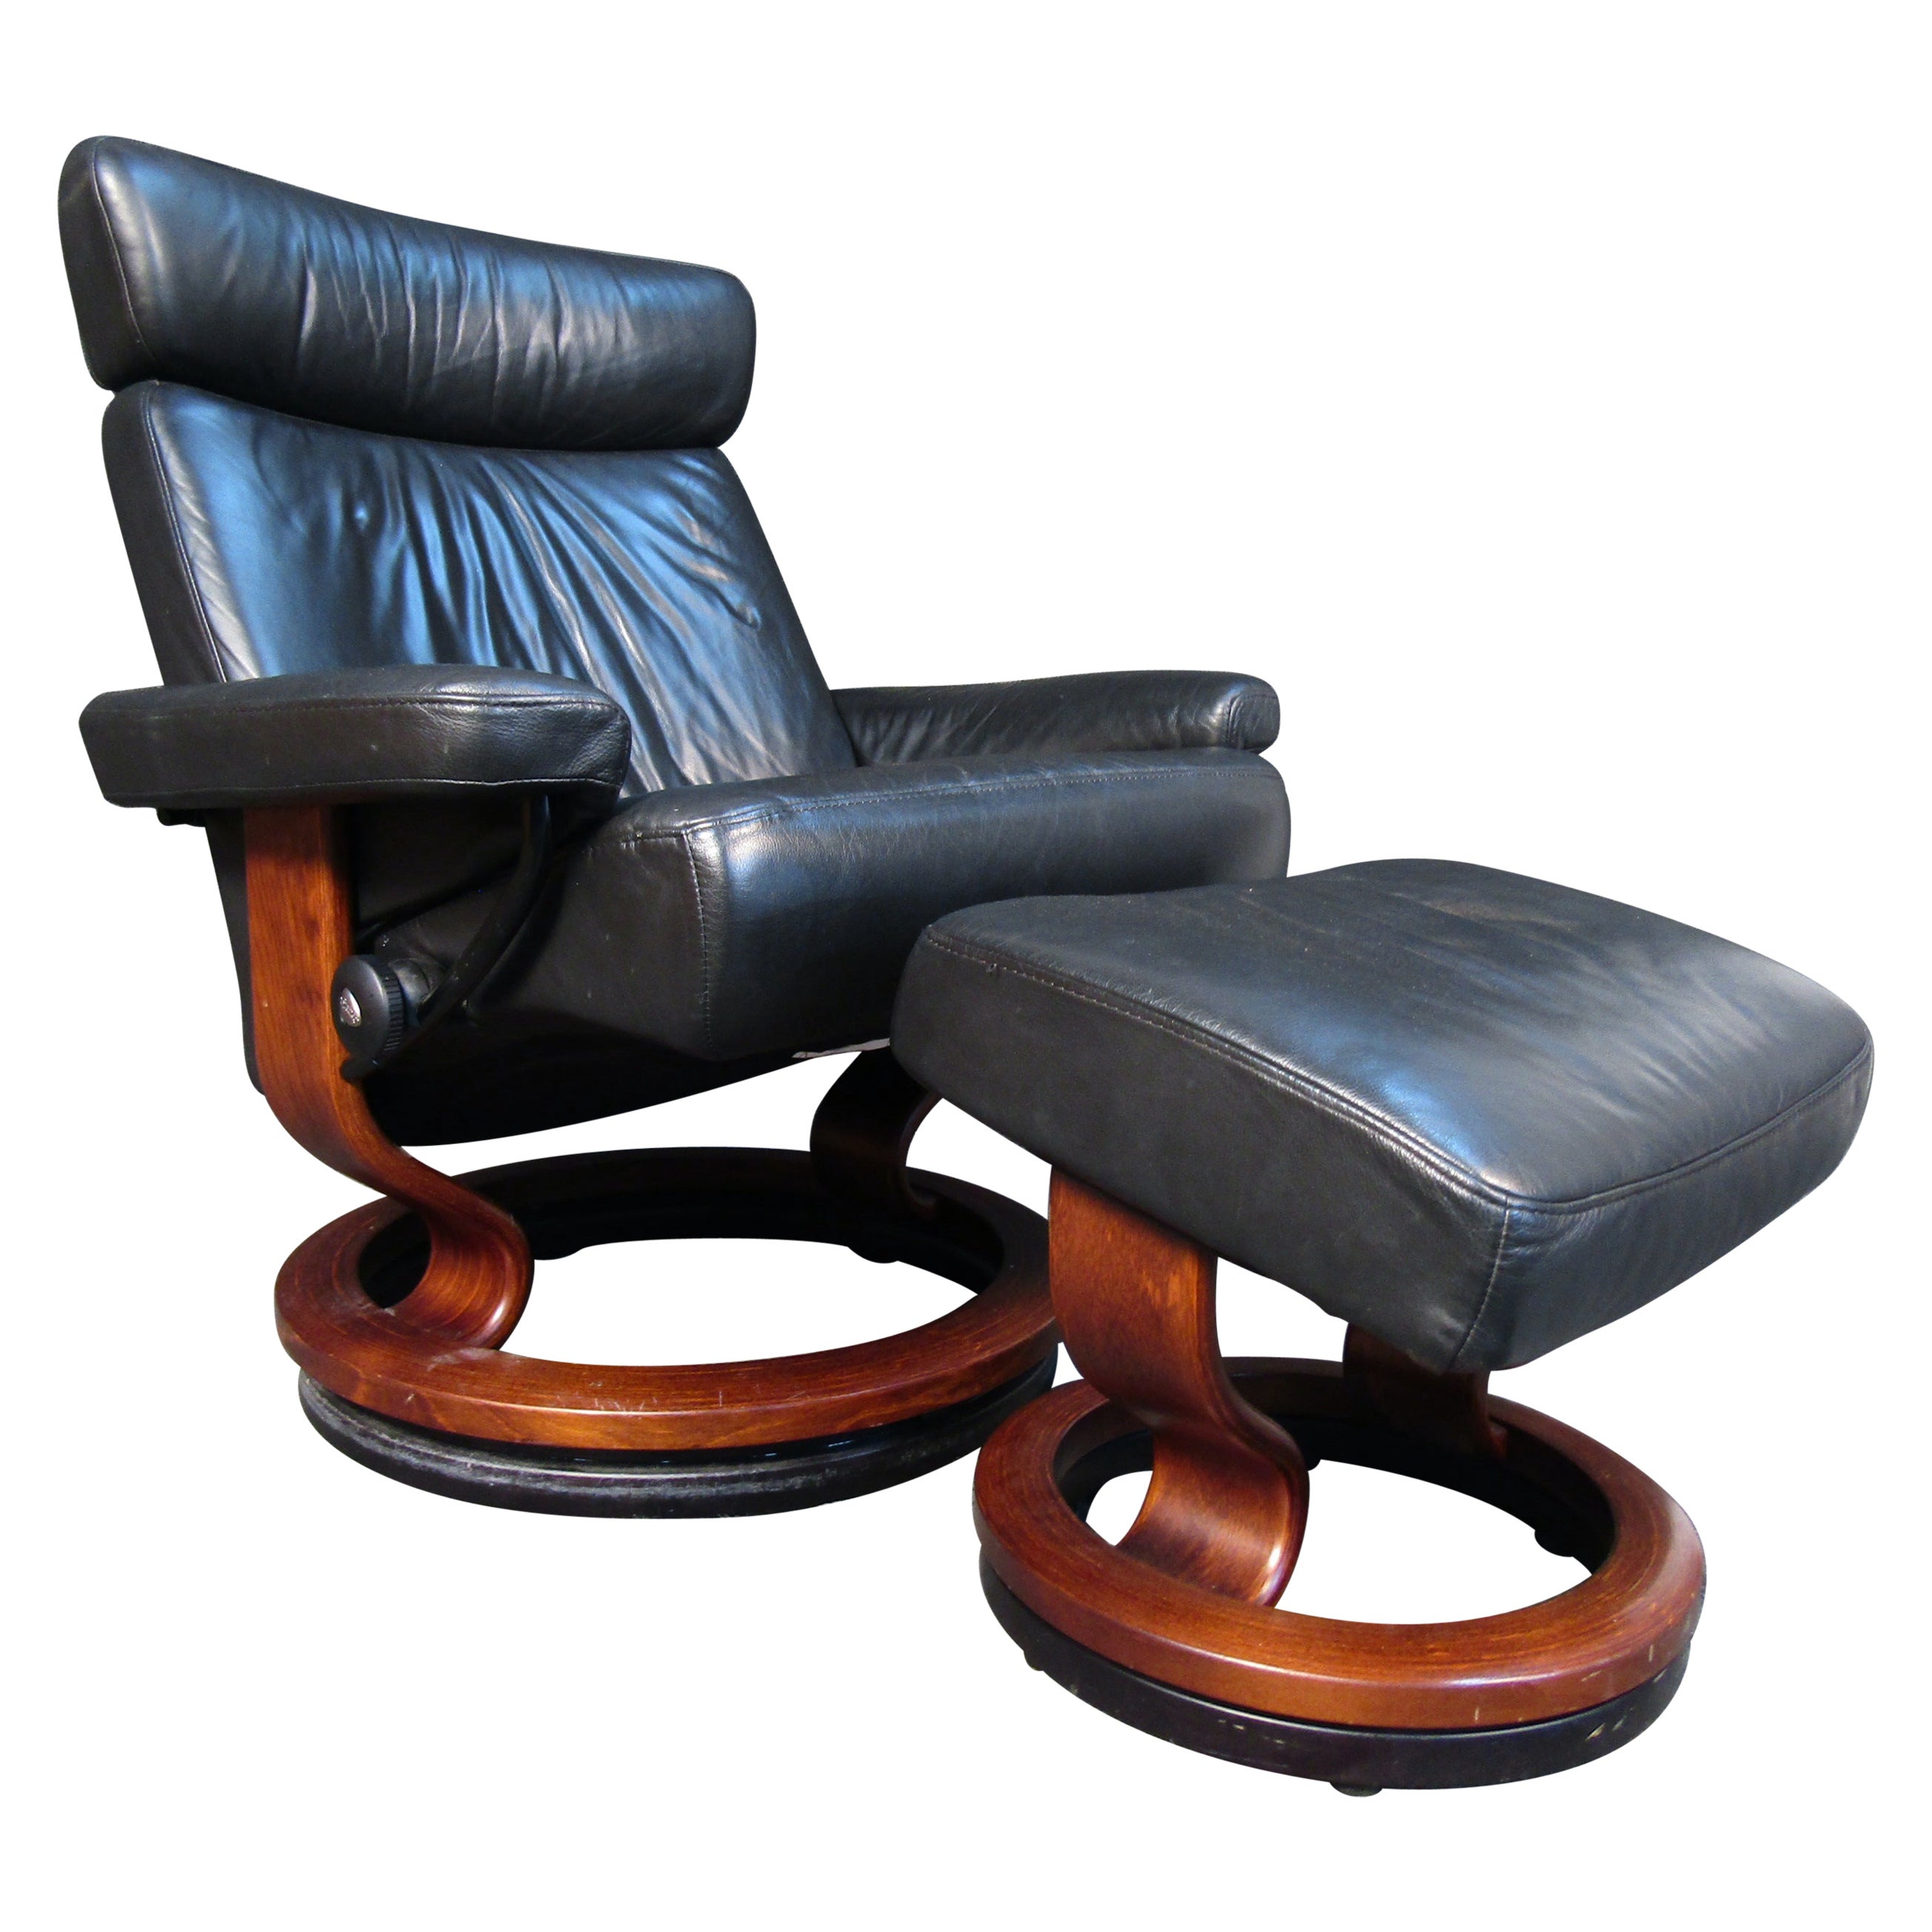 Reclining Leather Chair and Ottoman By Ekornes